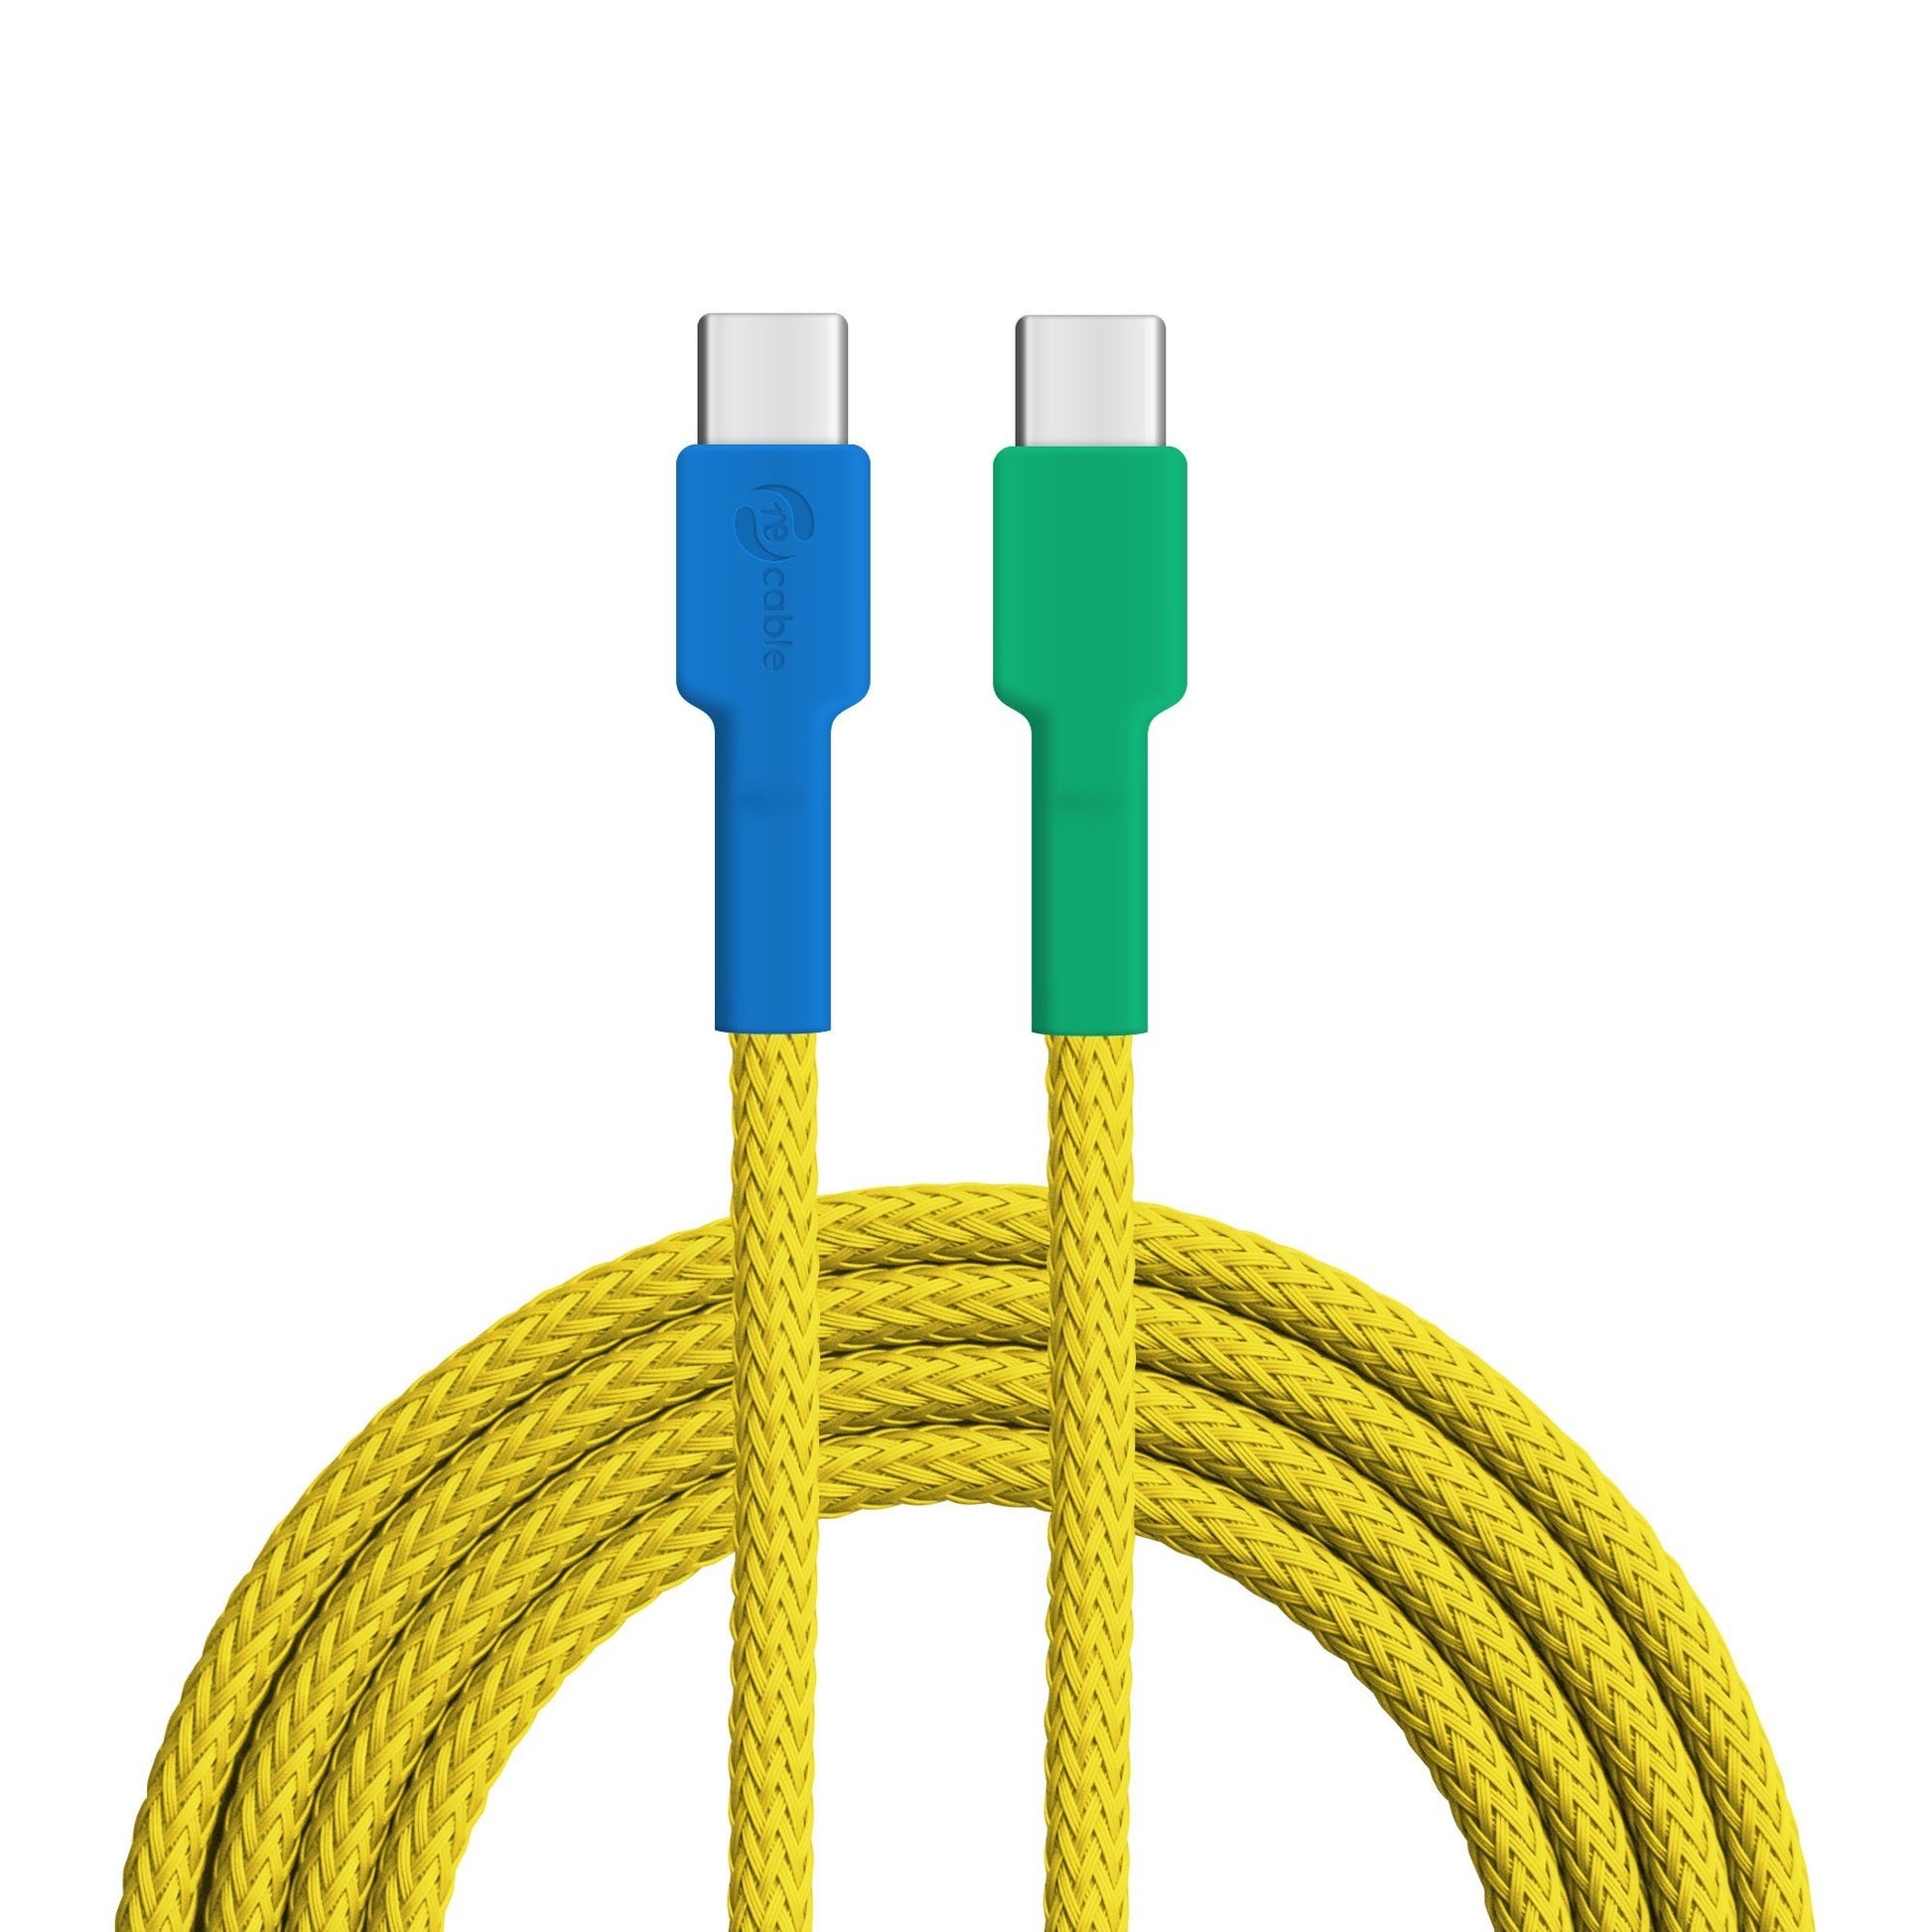 USB cable, Design: Blue-and-yellow macaw, Connections: USB C on USB C